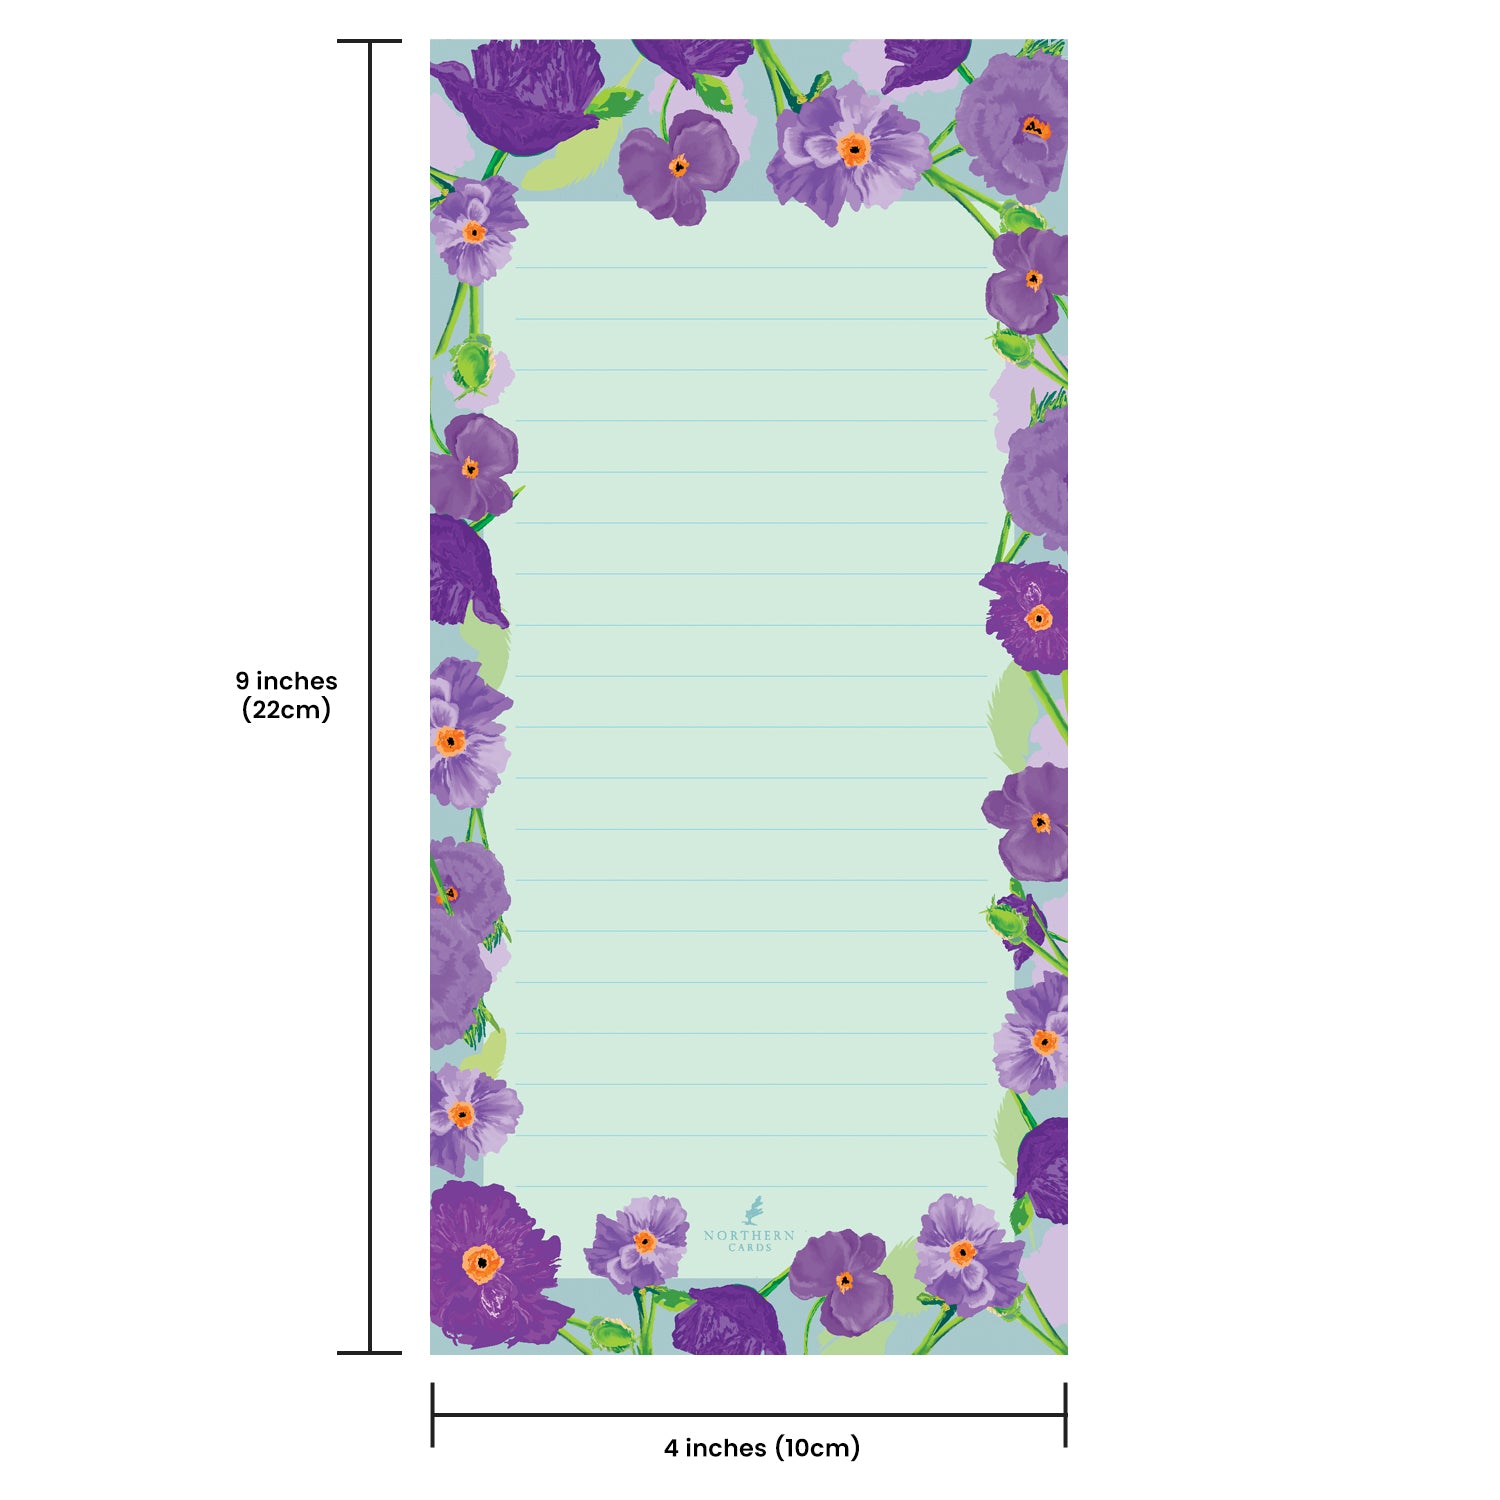 Pack of 6 Magnetic Fridge Notepads - Floral Design - 60 Sheets Per Pad - Northern Cards